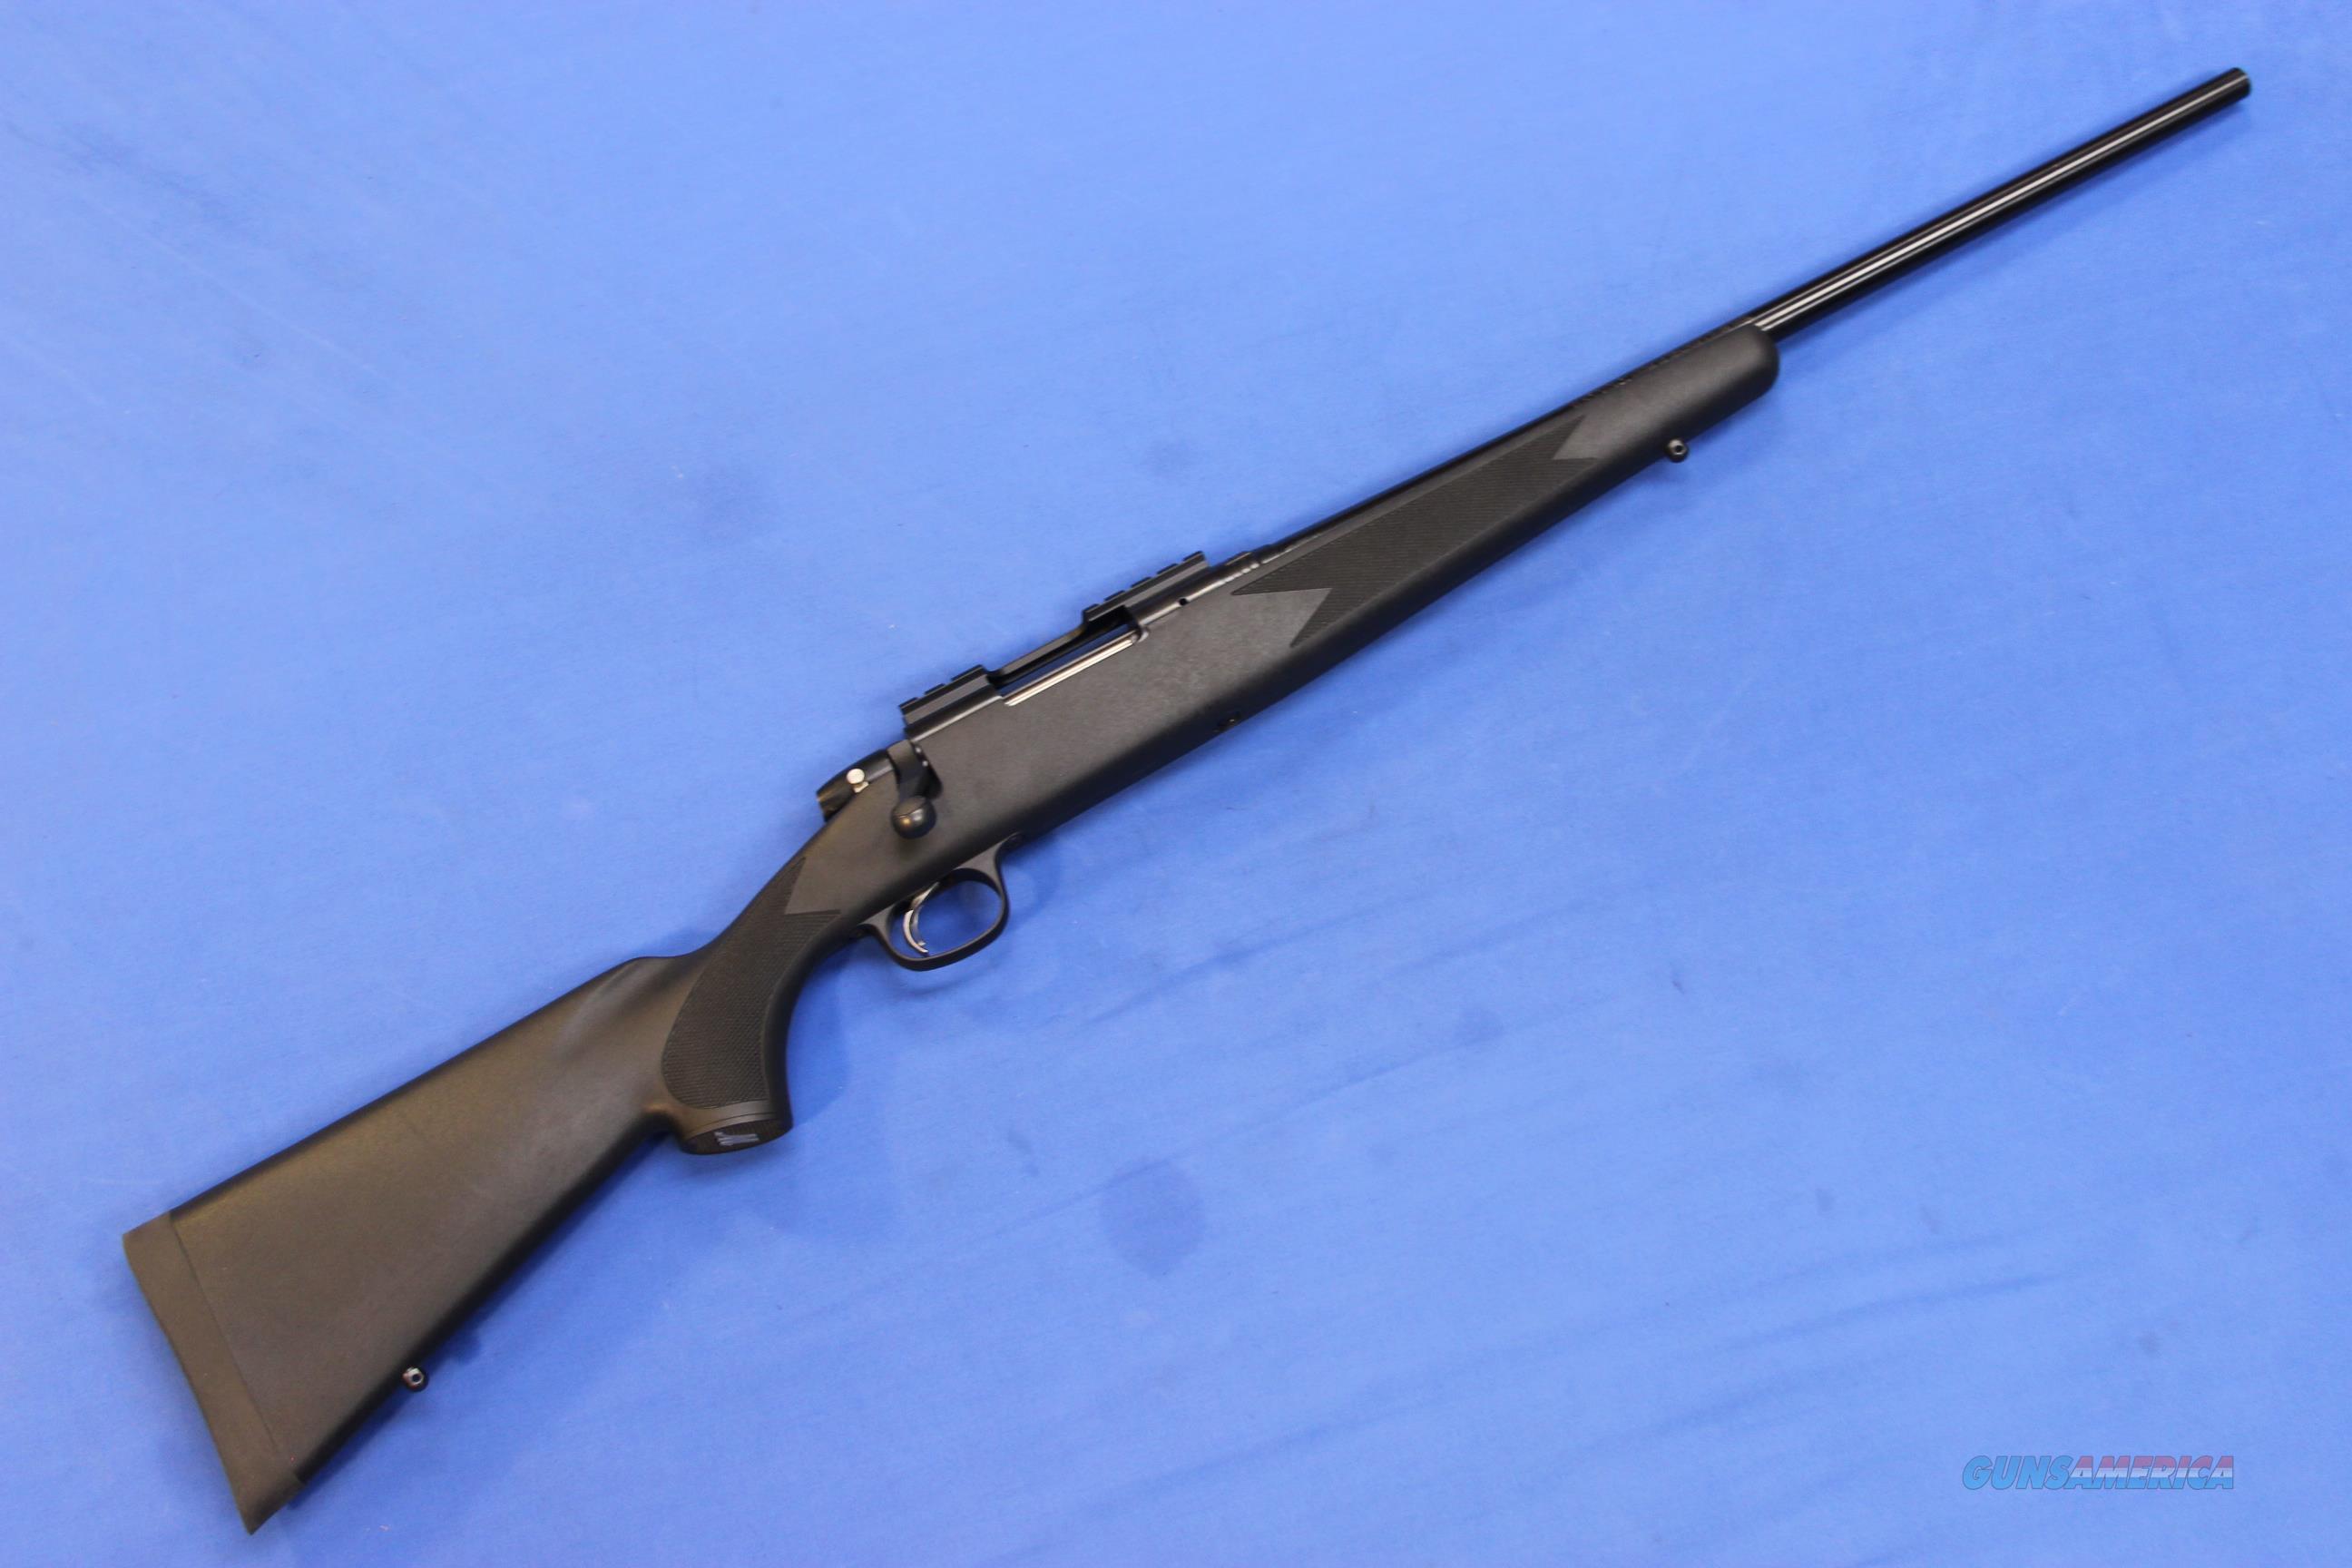 For sale we have a Marlin X7 rifle in 7mm-08. 